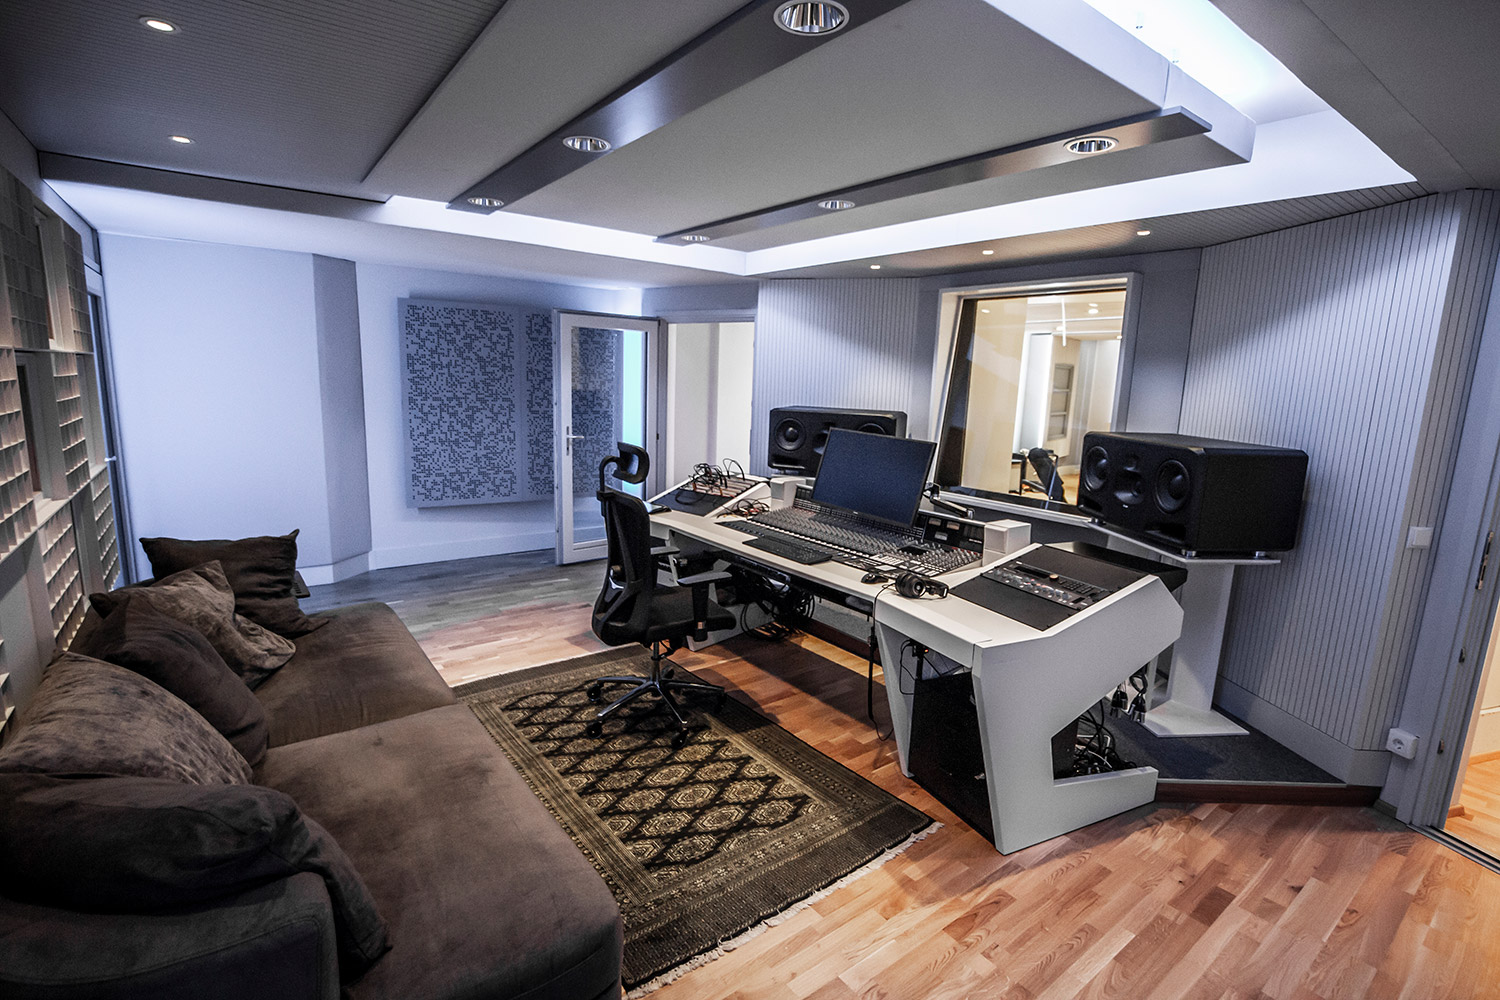 Vienna City Sound is a twelve-room recording studio built in the basement of a vintage commercial building in the heart of Vienna. Owner Peter Zimmerl’s retained the services of WSDG to design his dream studio. Control Room.